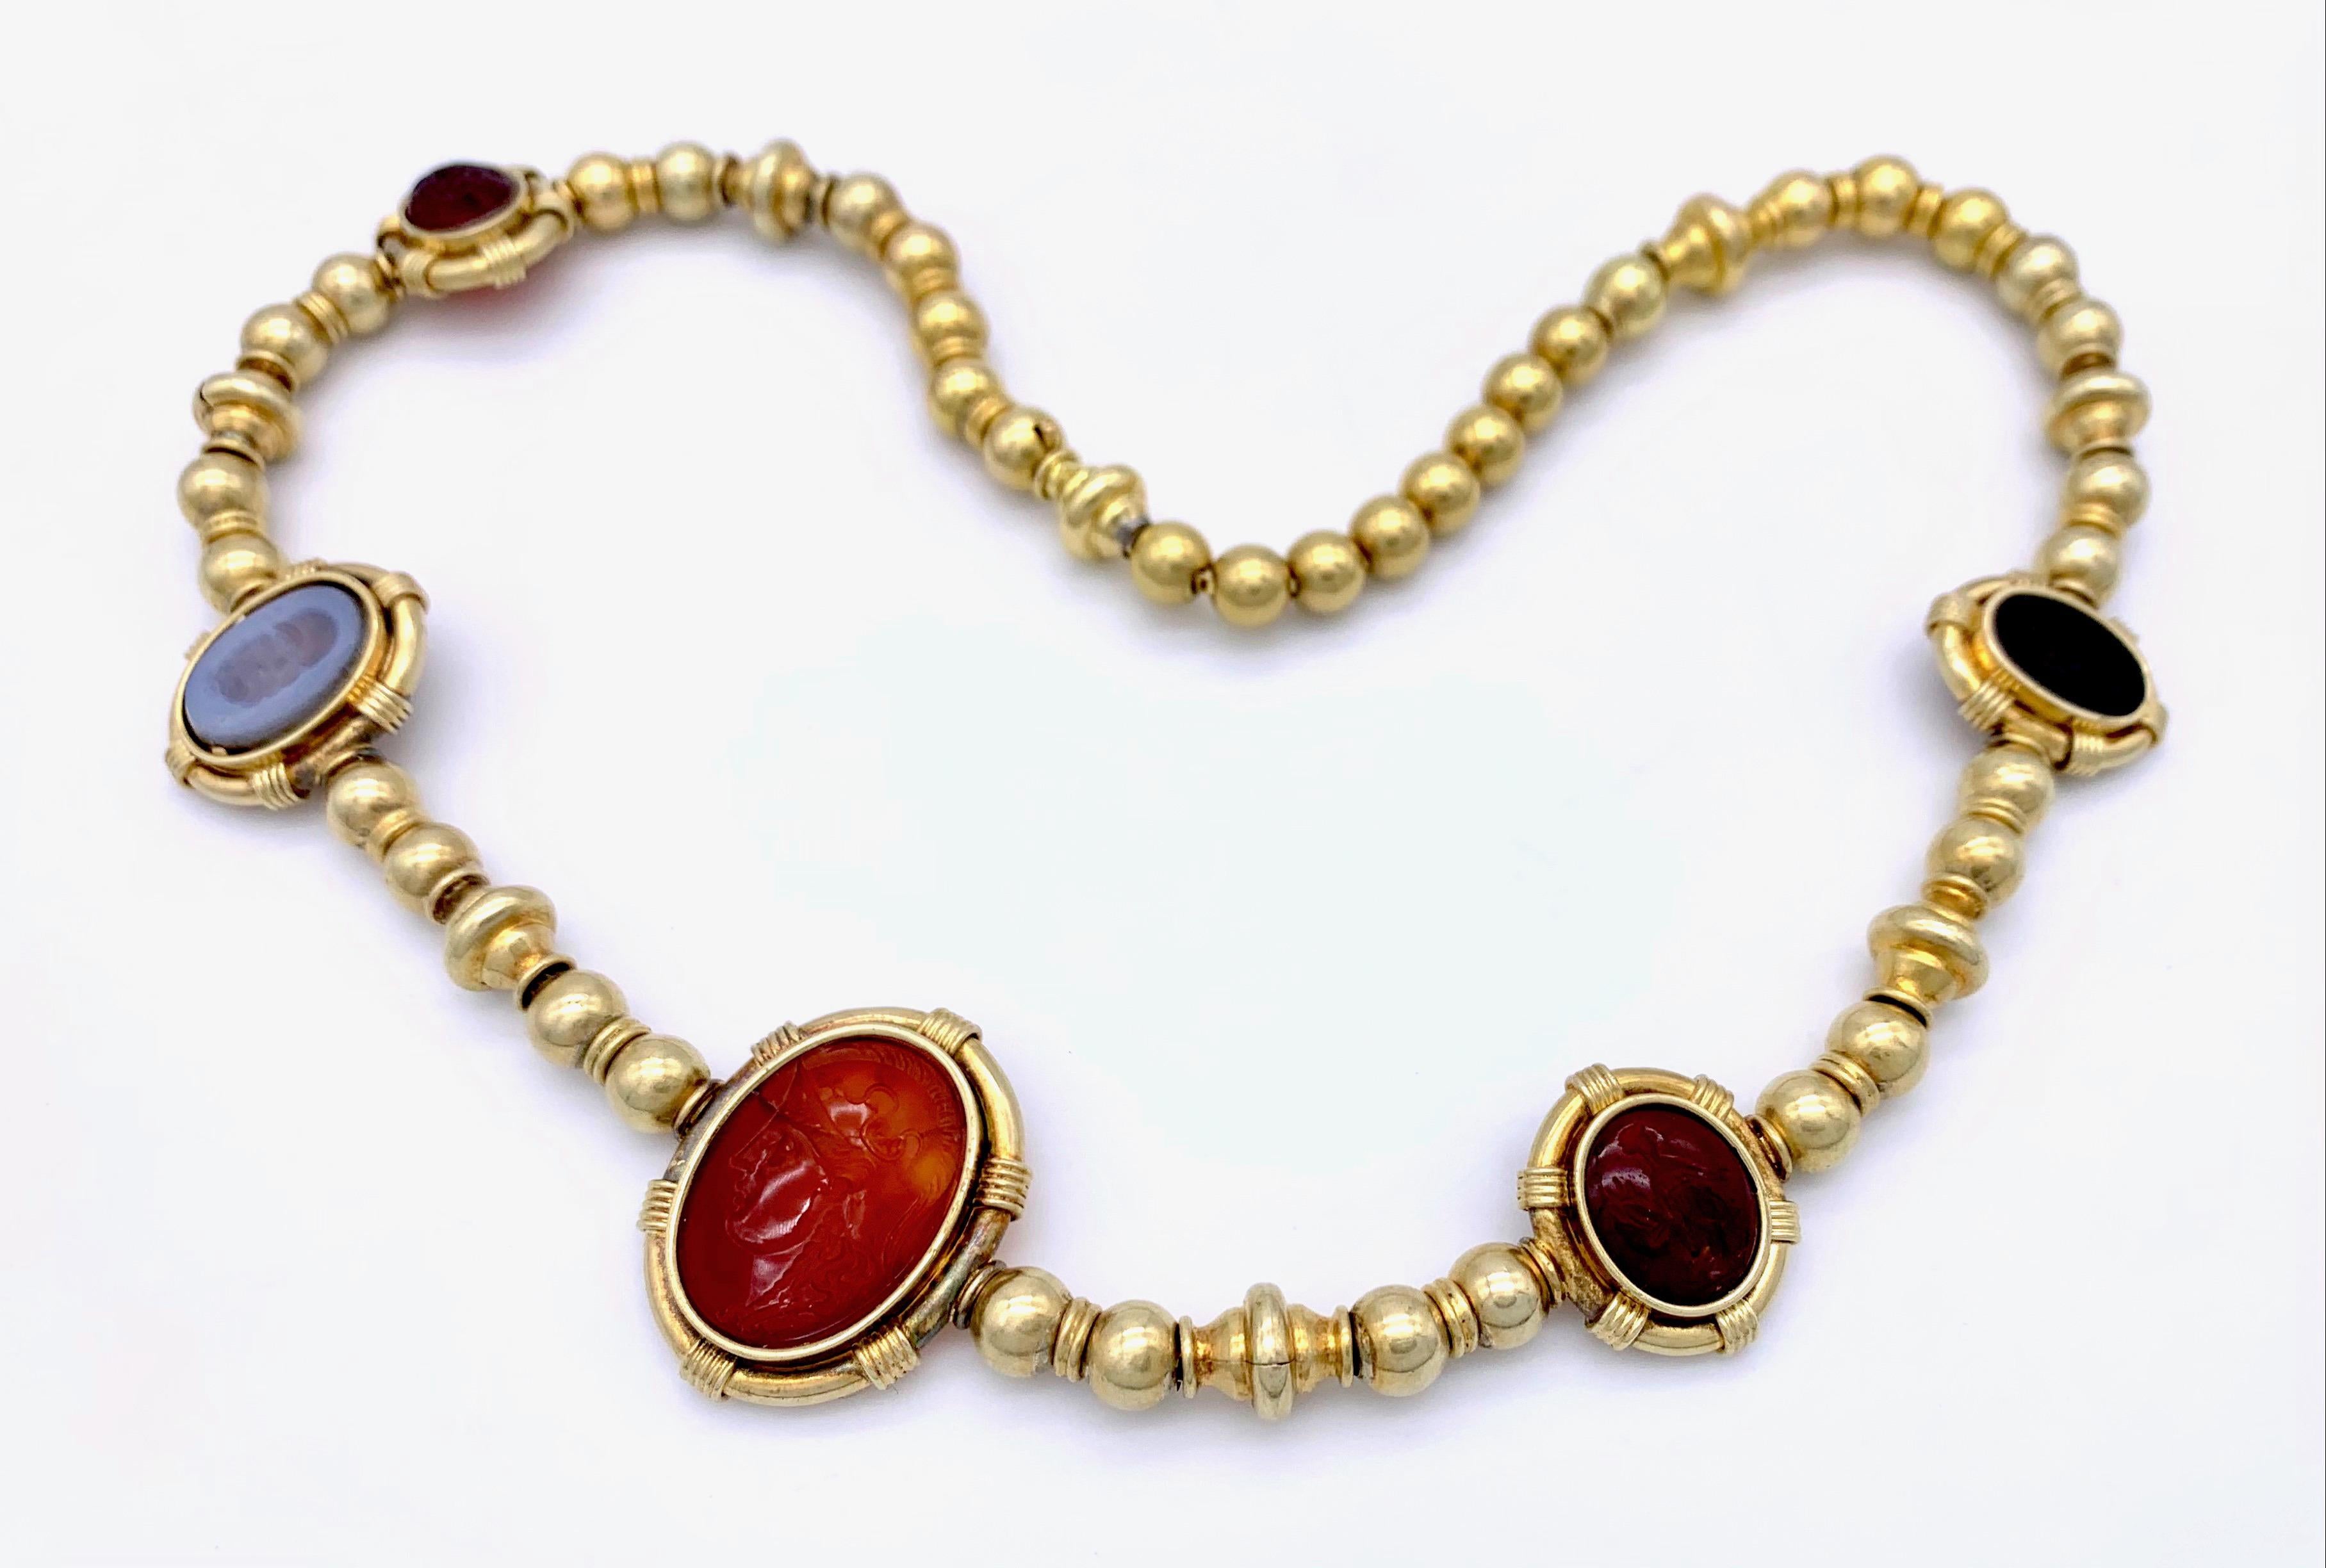 Five agate intaglios of varying size and age have been mounted in 18 karat gold settings. The settings are connected by golden balls made out of 18karat .
They are threaded on a foxtail chain.
The intaglios from left to right feature a sitting